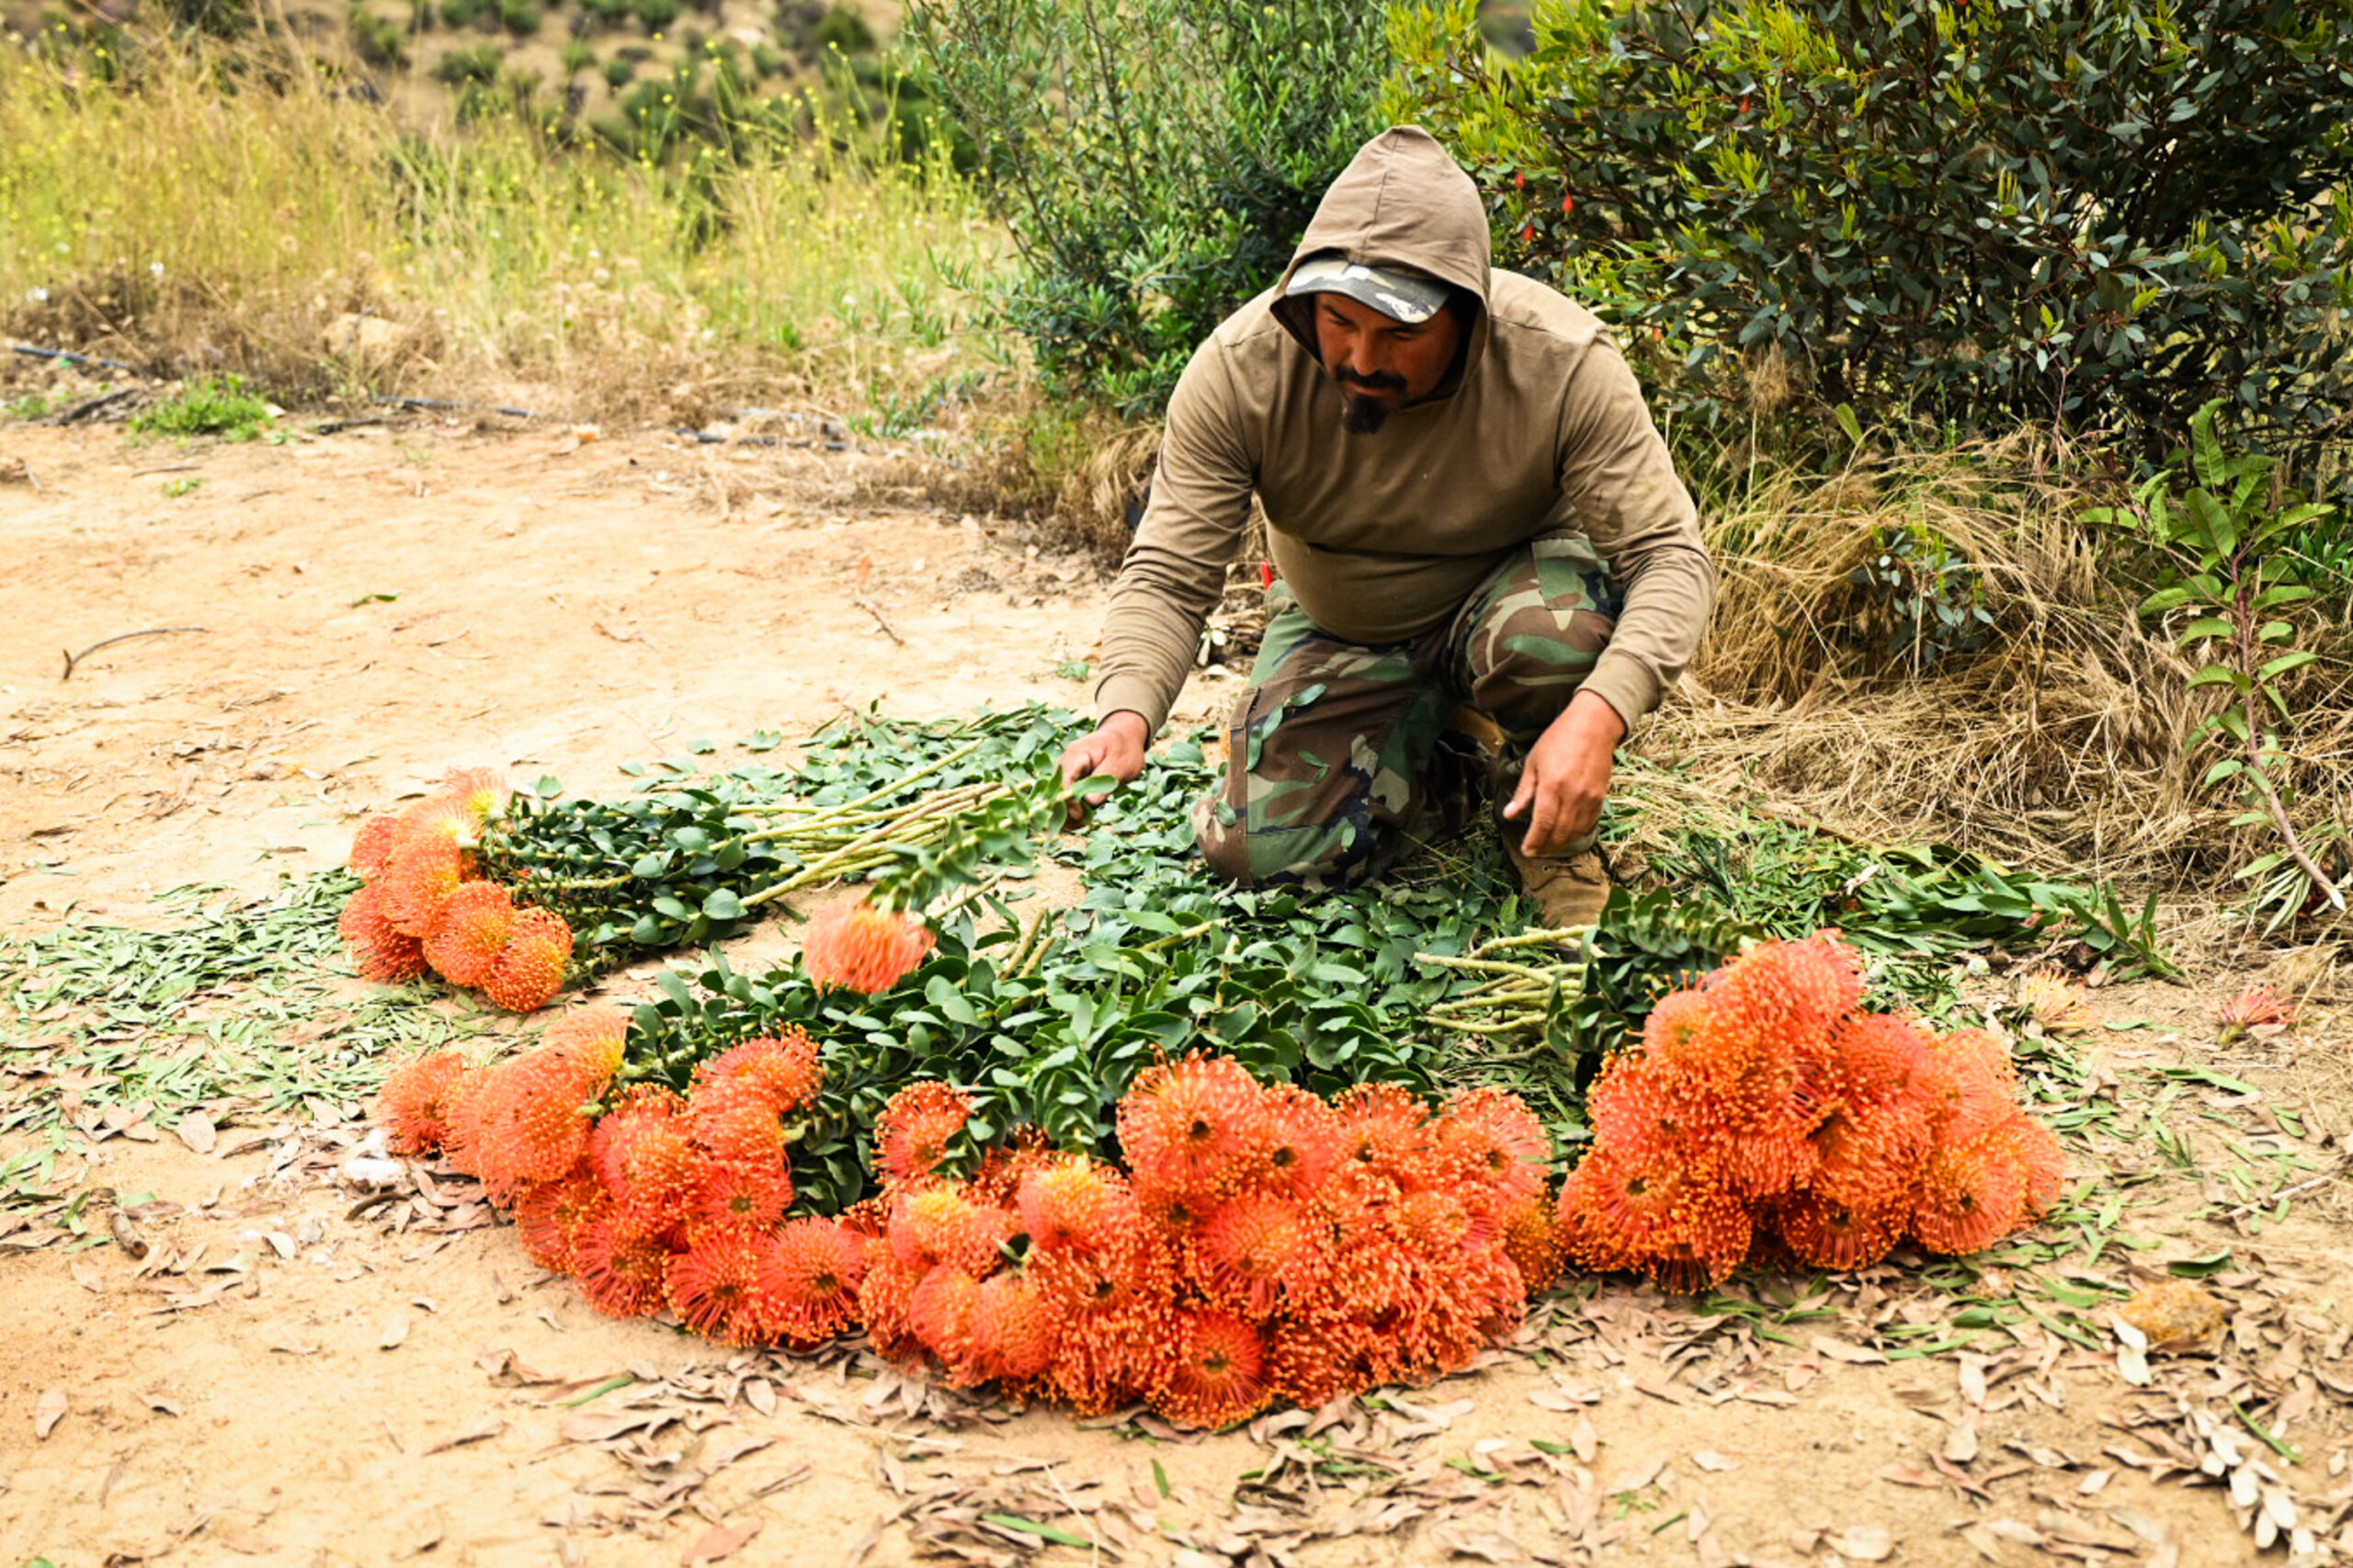 A farmworker stripping leaves from stems of proteas